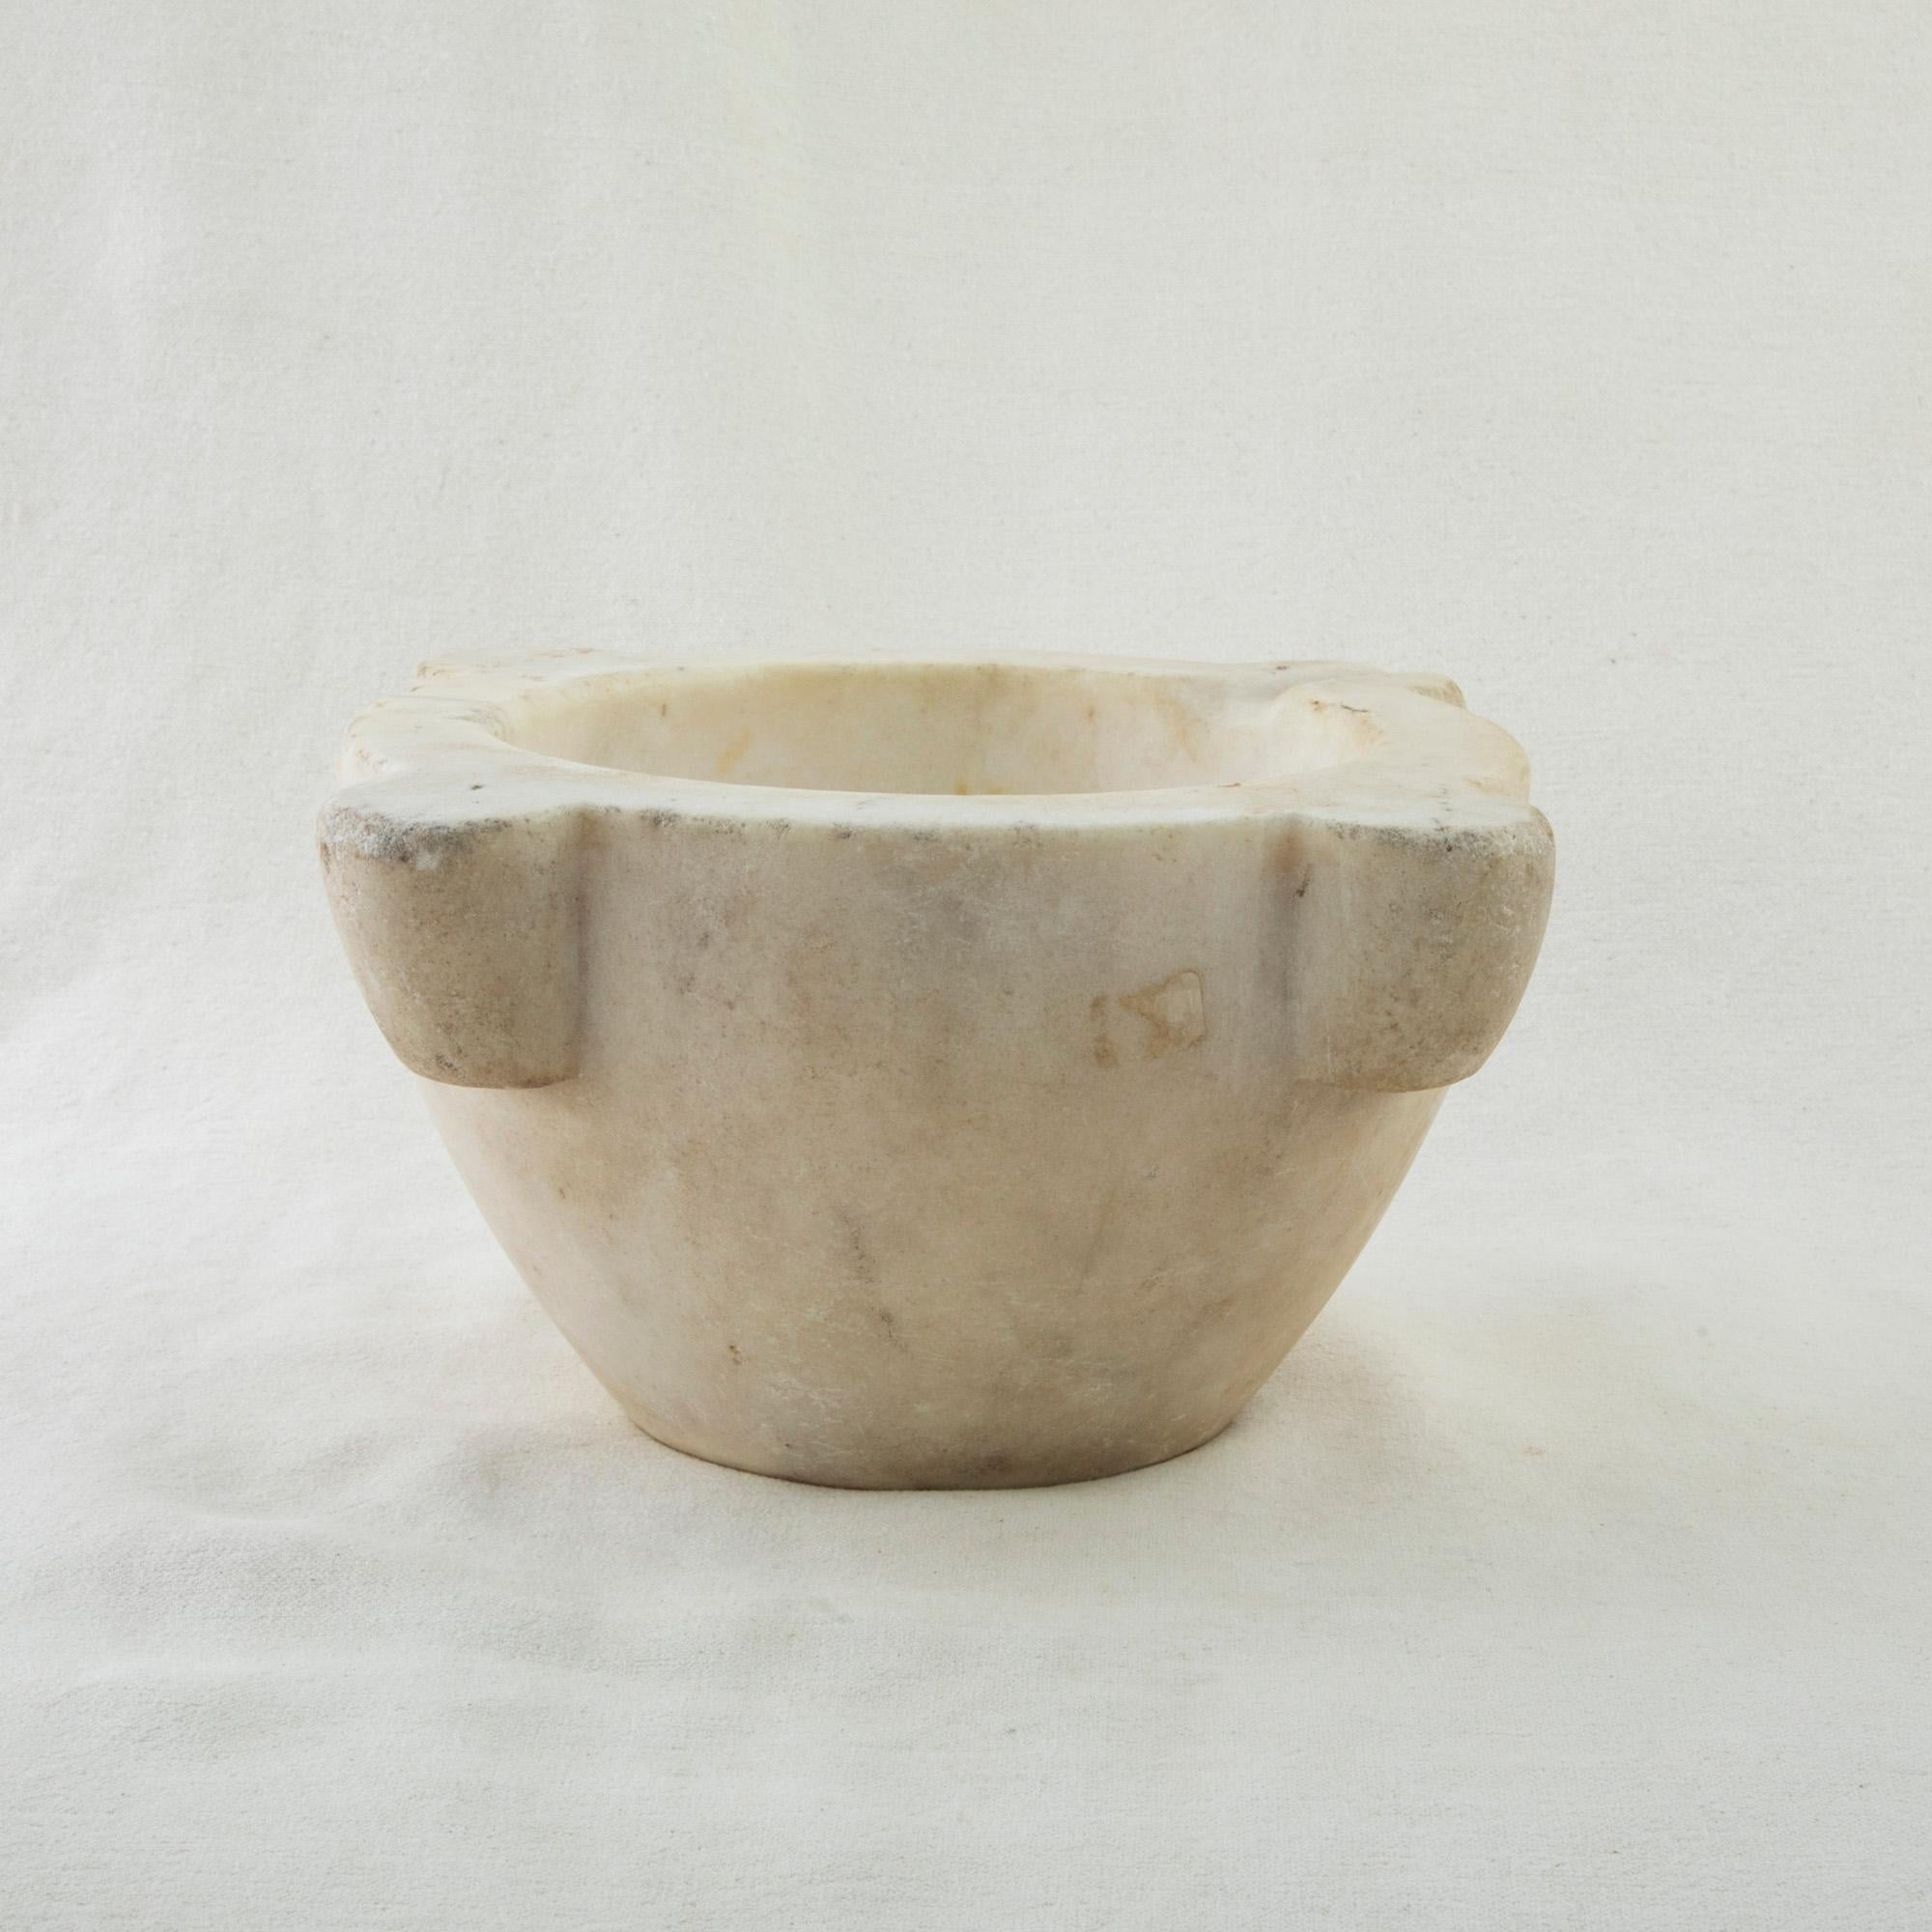 This large marble mortar from the nineteenth century is made from a single block of Carrara marble and features its original turned pestle made of alder wood. Once used by a pharmacist to grind herbs for medicinal purposes, it can now serve as a